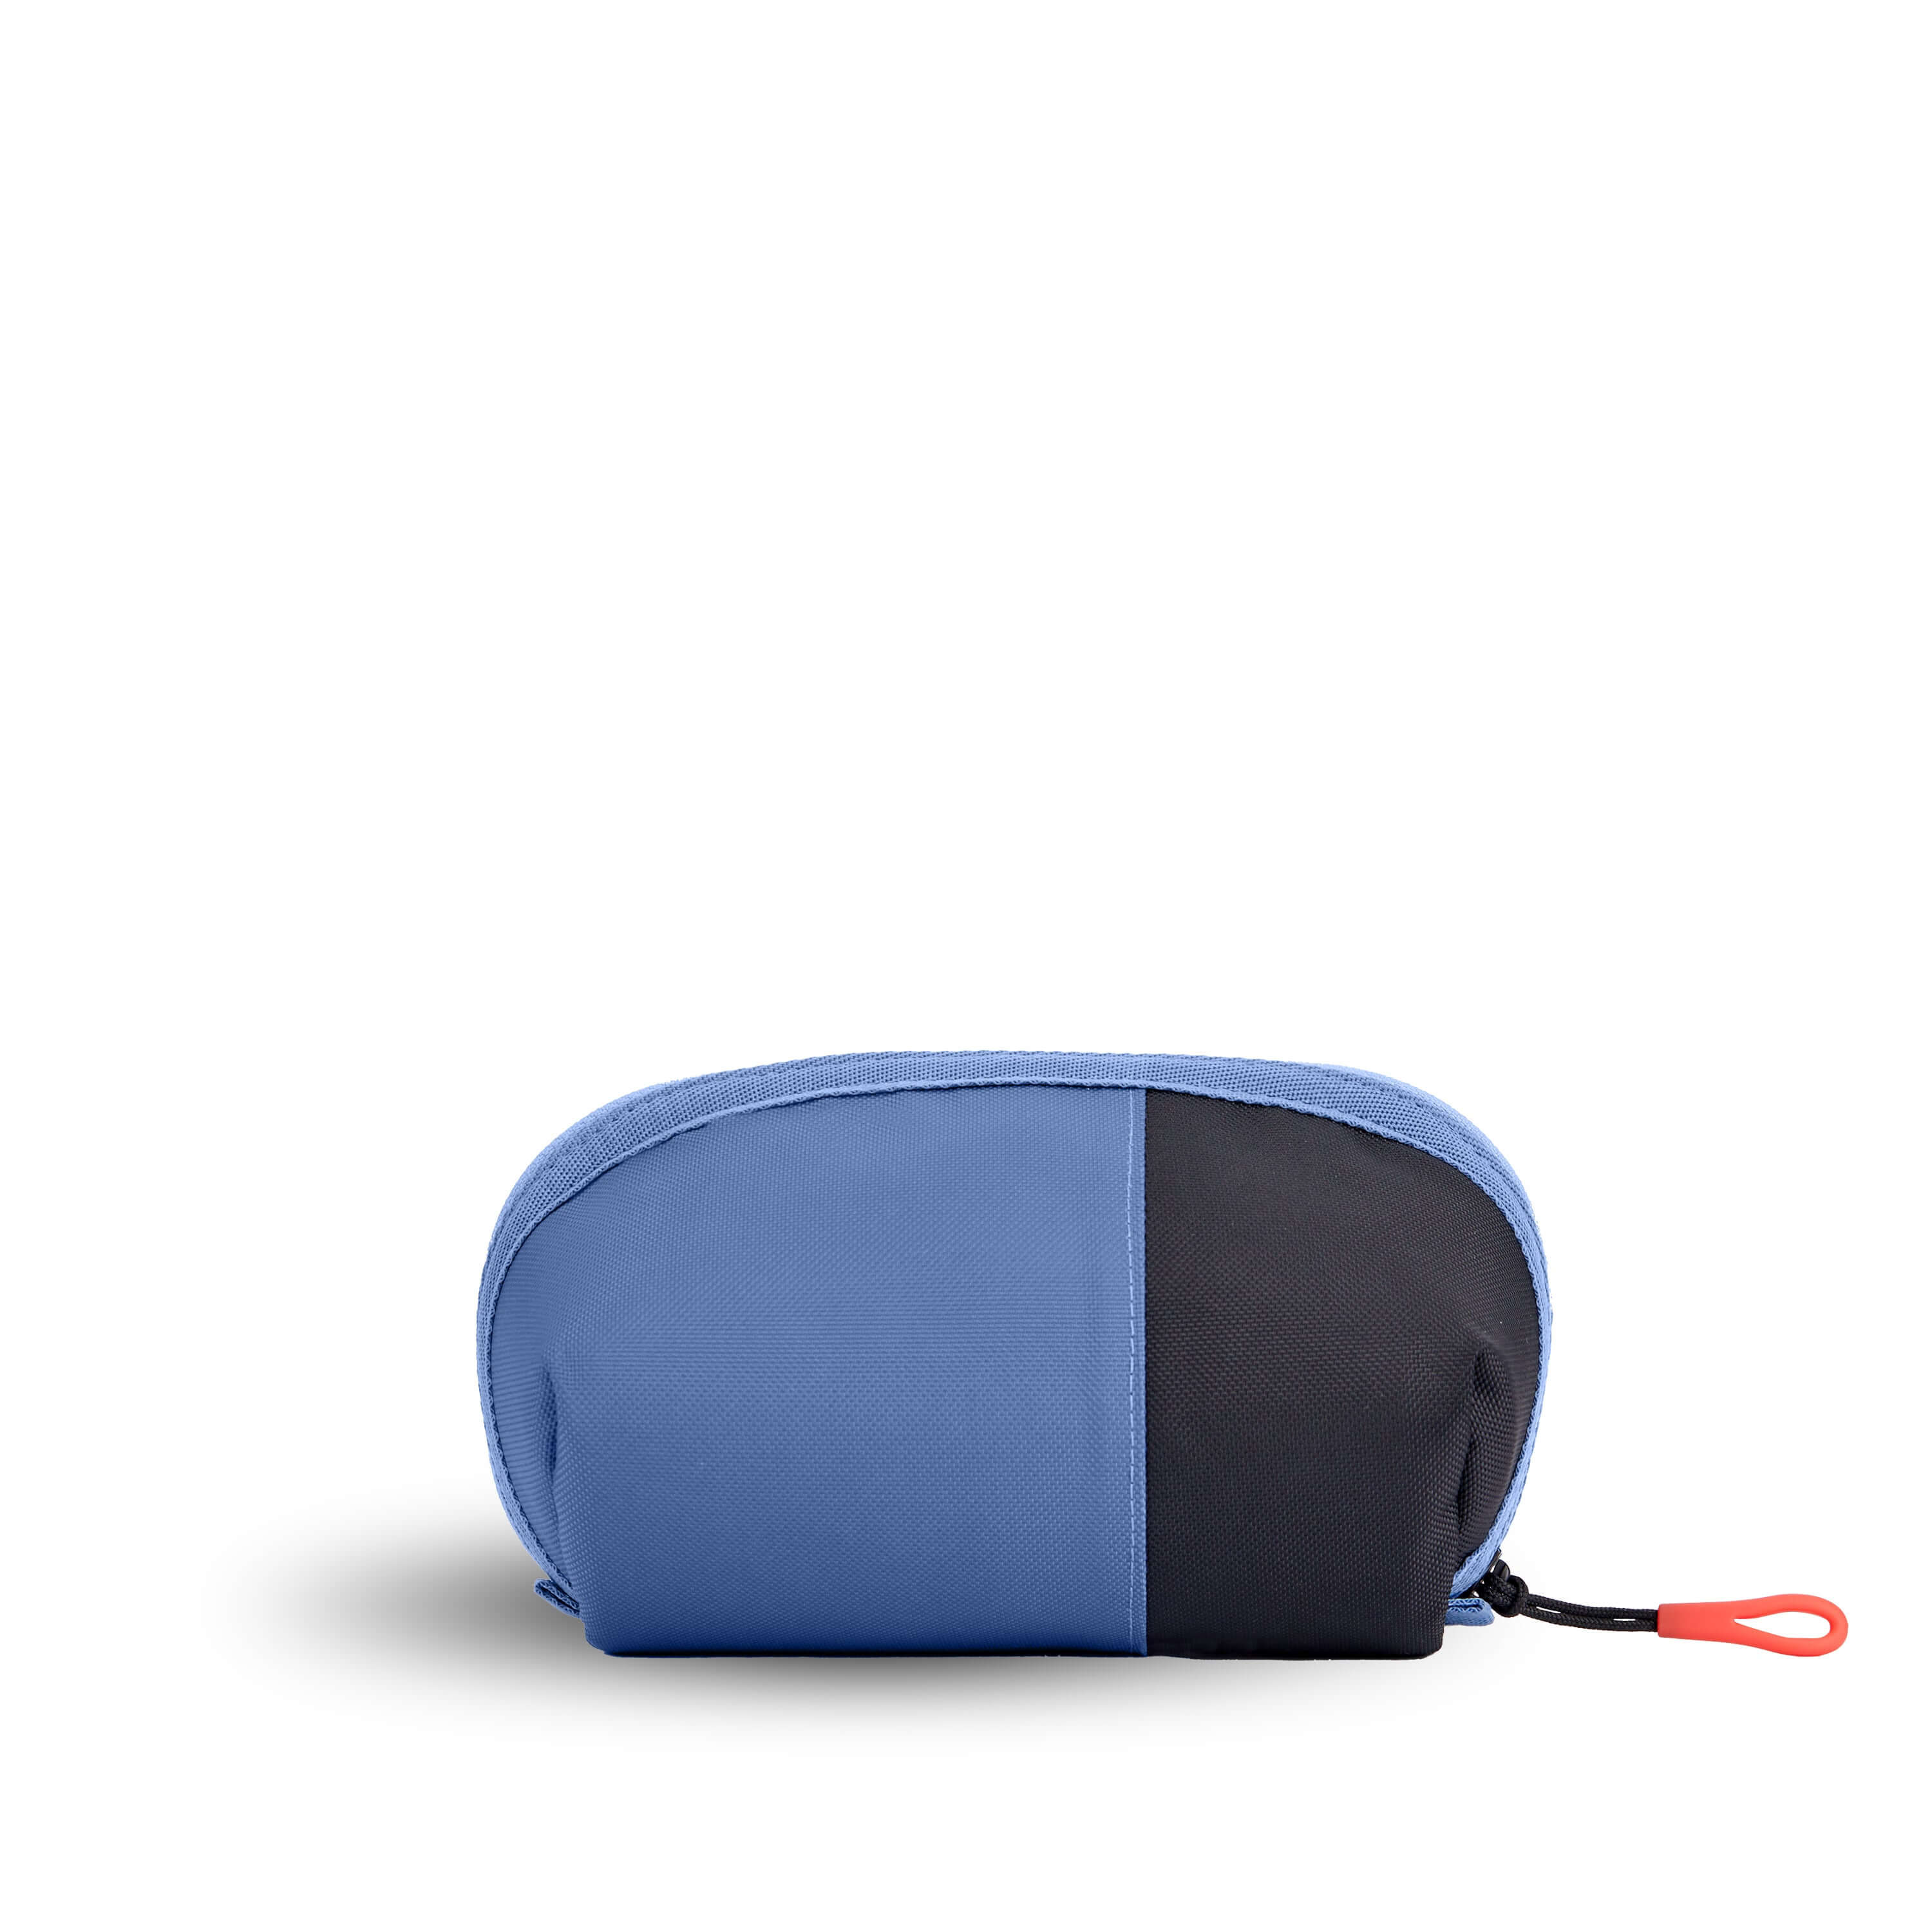 Back view of Sherpani travel accessory the Harmony in Pacific Blue. The pouch is two toned in ocean blue and black. 